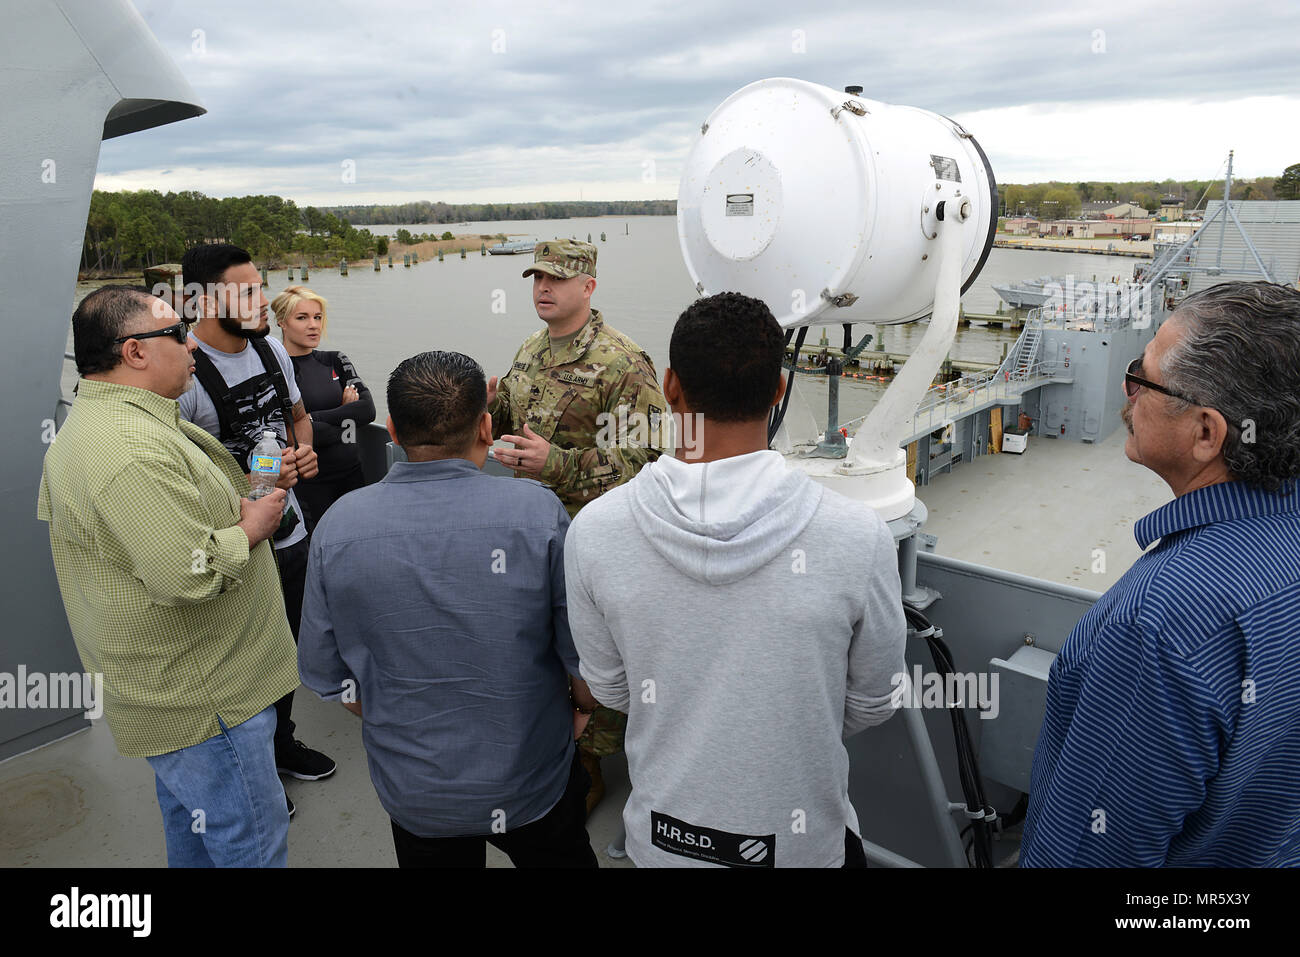 U.S. Army Staff Sgt. Ralph Genovese, 335th Transportation Detachment training NCO, guides UFC Fighters and guests on a tour of the Logistic Support Vessel Gen. Frank S. Besson Jr. at Joint Base Langley-Eustis, Va., April 6, 2017. The fighters interacted with community members during meet-and-greet events at the Fort Eustis Exchange, bowling alley and Anderson Field House. (U.S. Air Force photo/Staff Sgt. Teresa J. Cleveland) Stock Photo